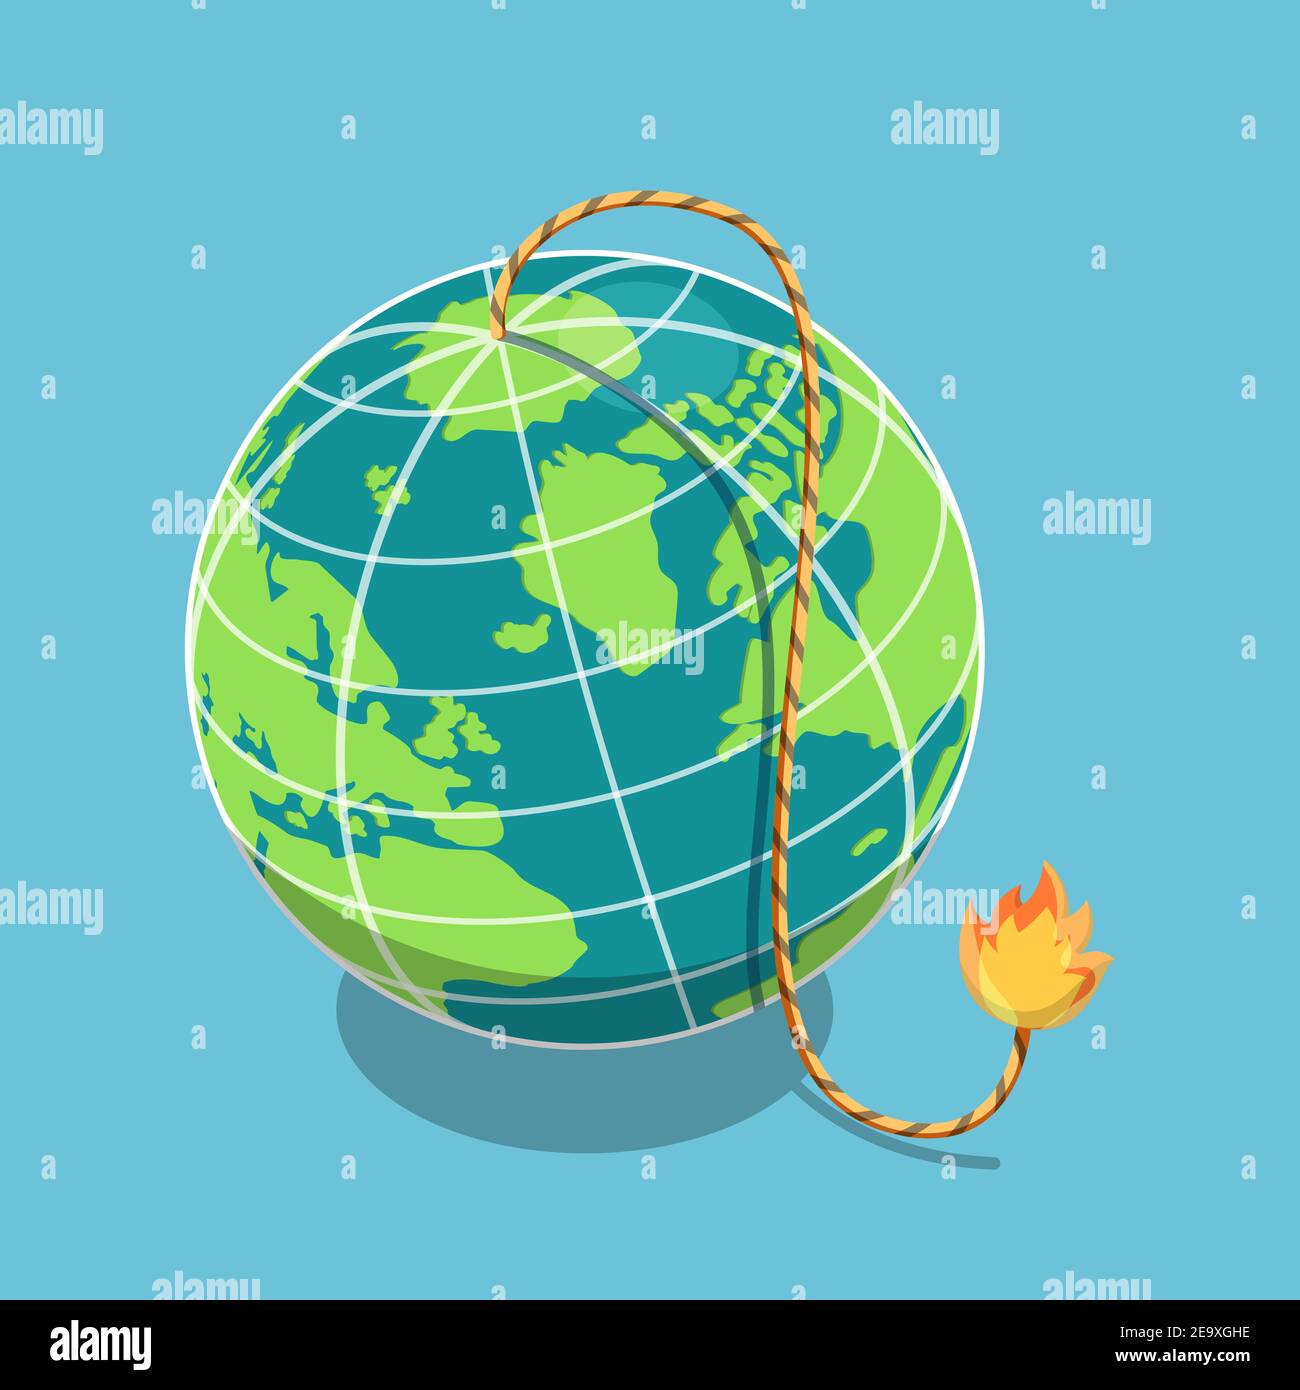 Flat 3d Isometric The Planet Earth with Burning Fuse. Global Catastrophe and World Economic Crisis Concept. Stock Vector